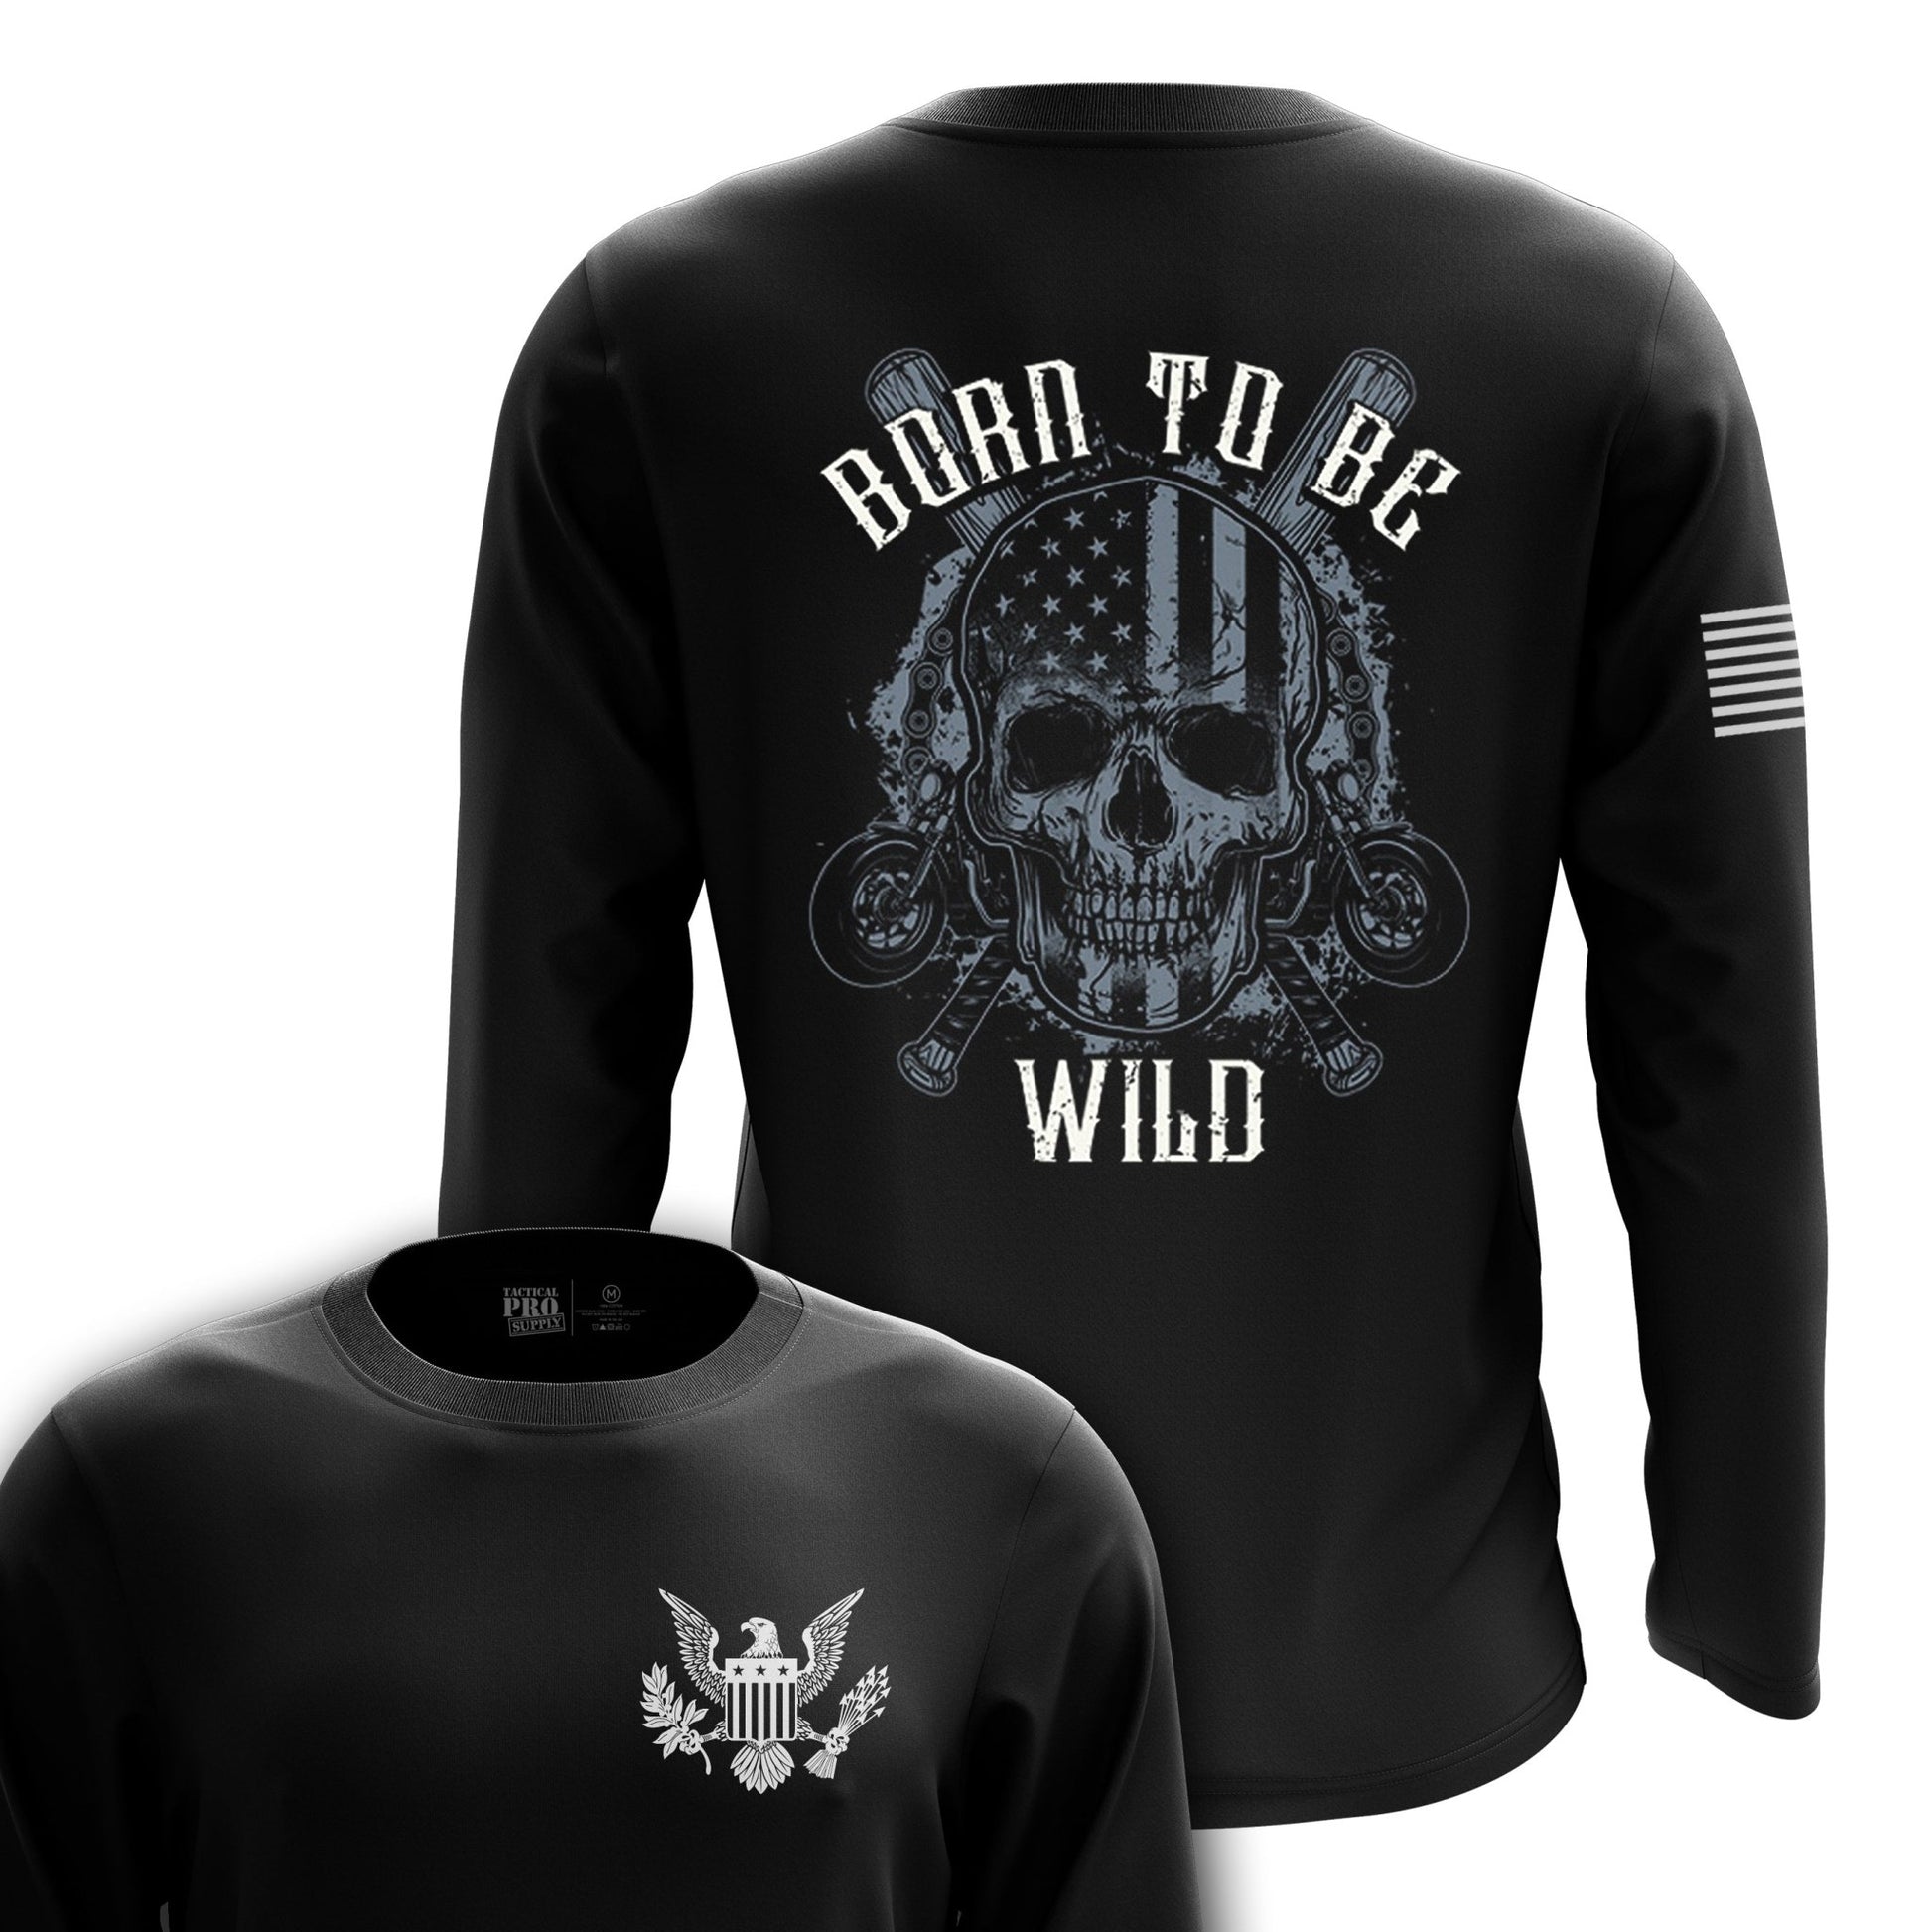 Born to Be Wild - Tactical Pro Supply, LLC